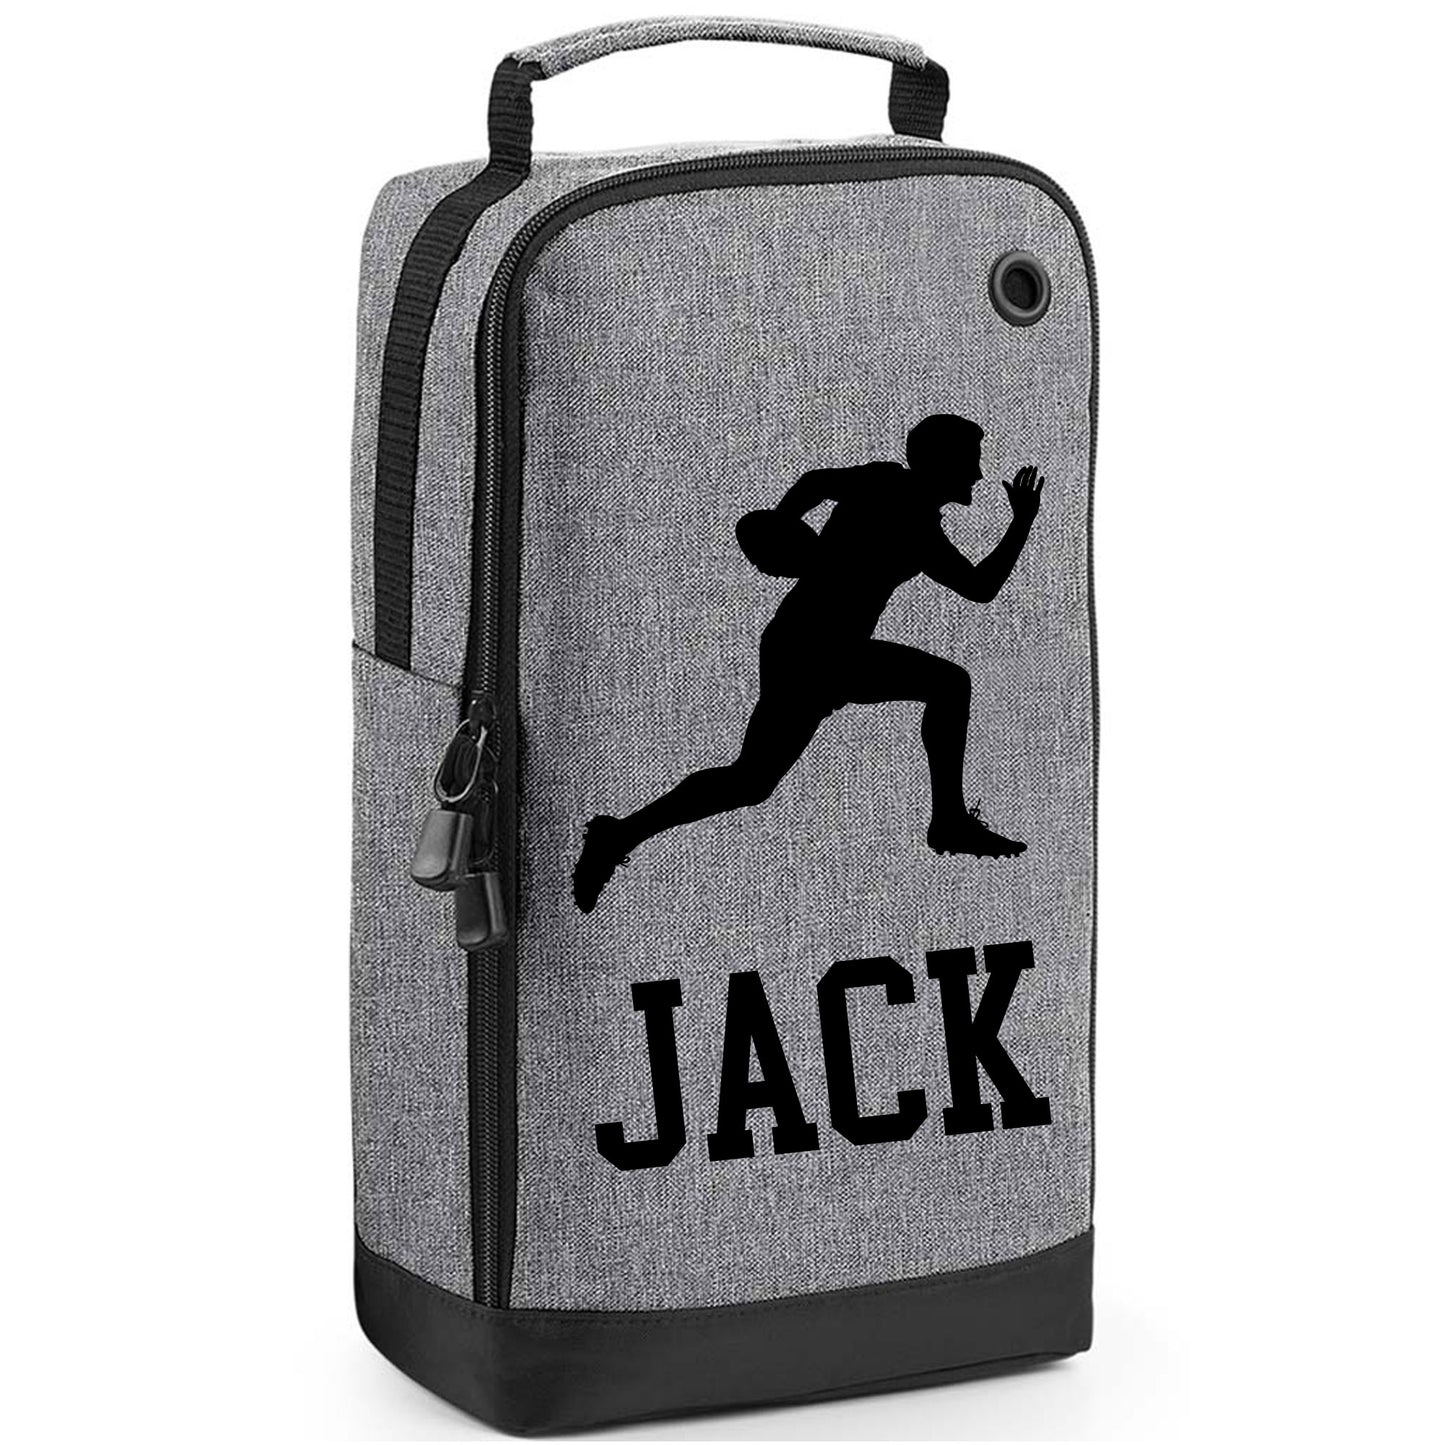 Personalised Rugby/ American Football Boot Bag with Design & Name  - Always Looking Good - Grey  